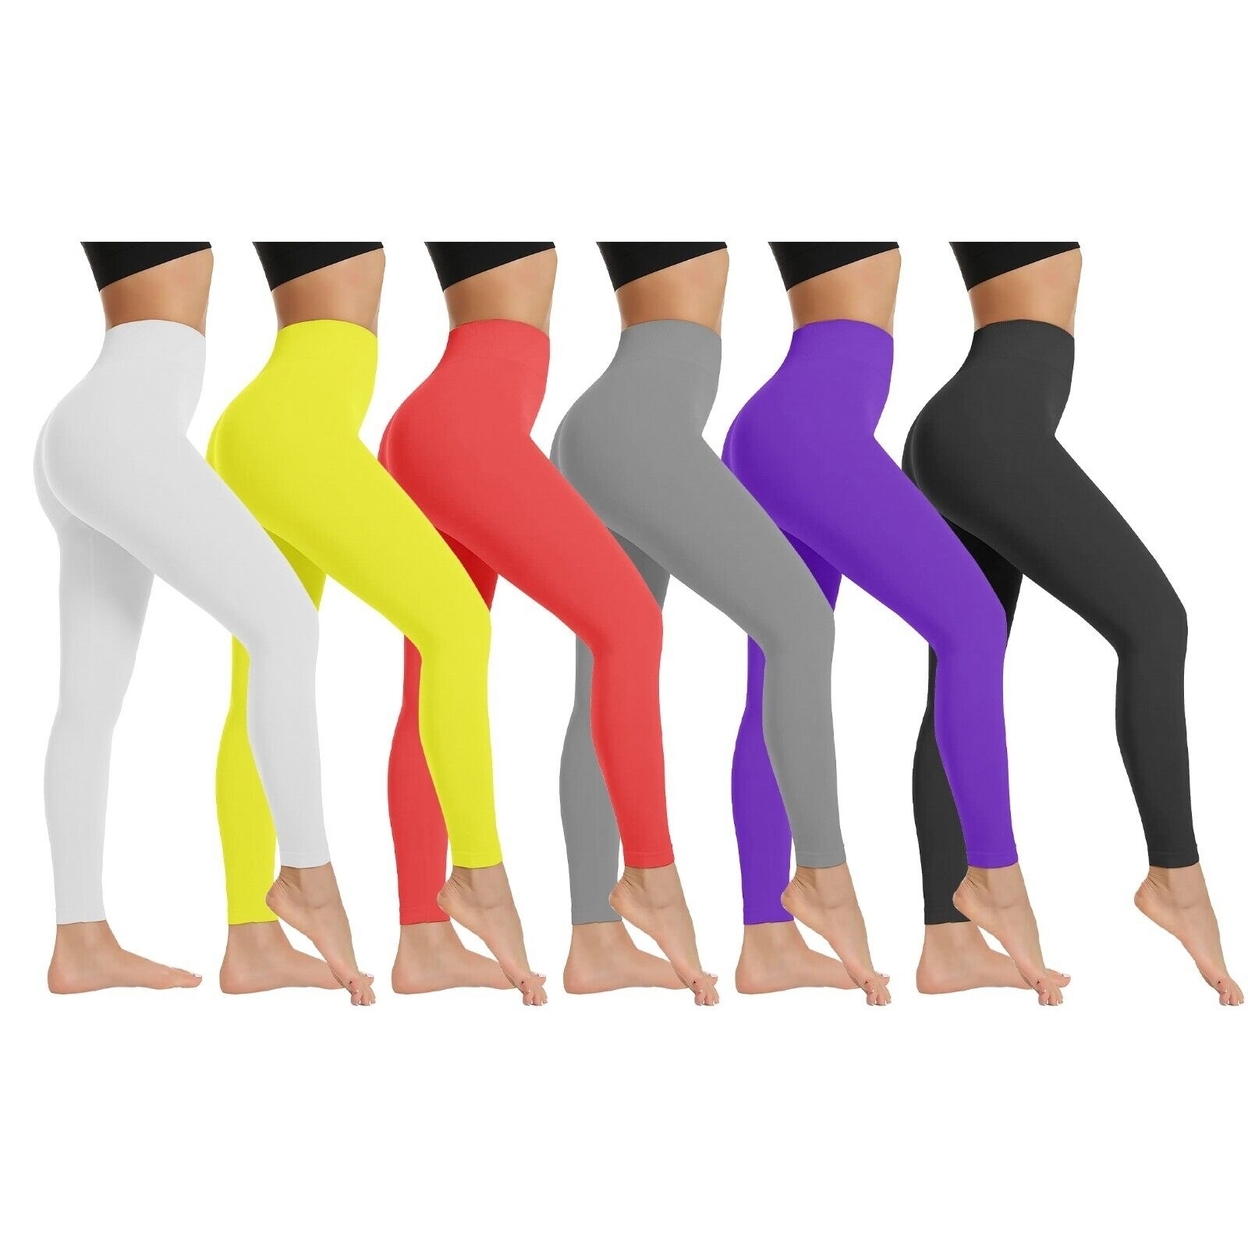 3-Pack: Women's High Waist Super Soft Active Athlete Stretch Yoga Cozy Leggings - Red,red,red, Small